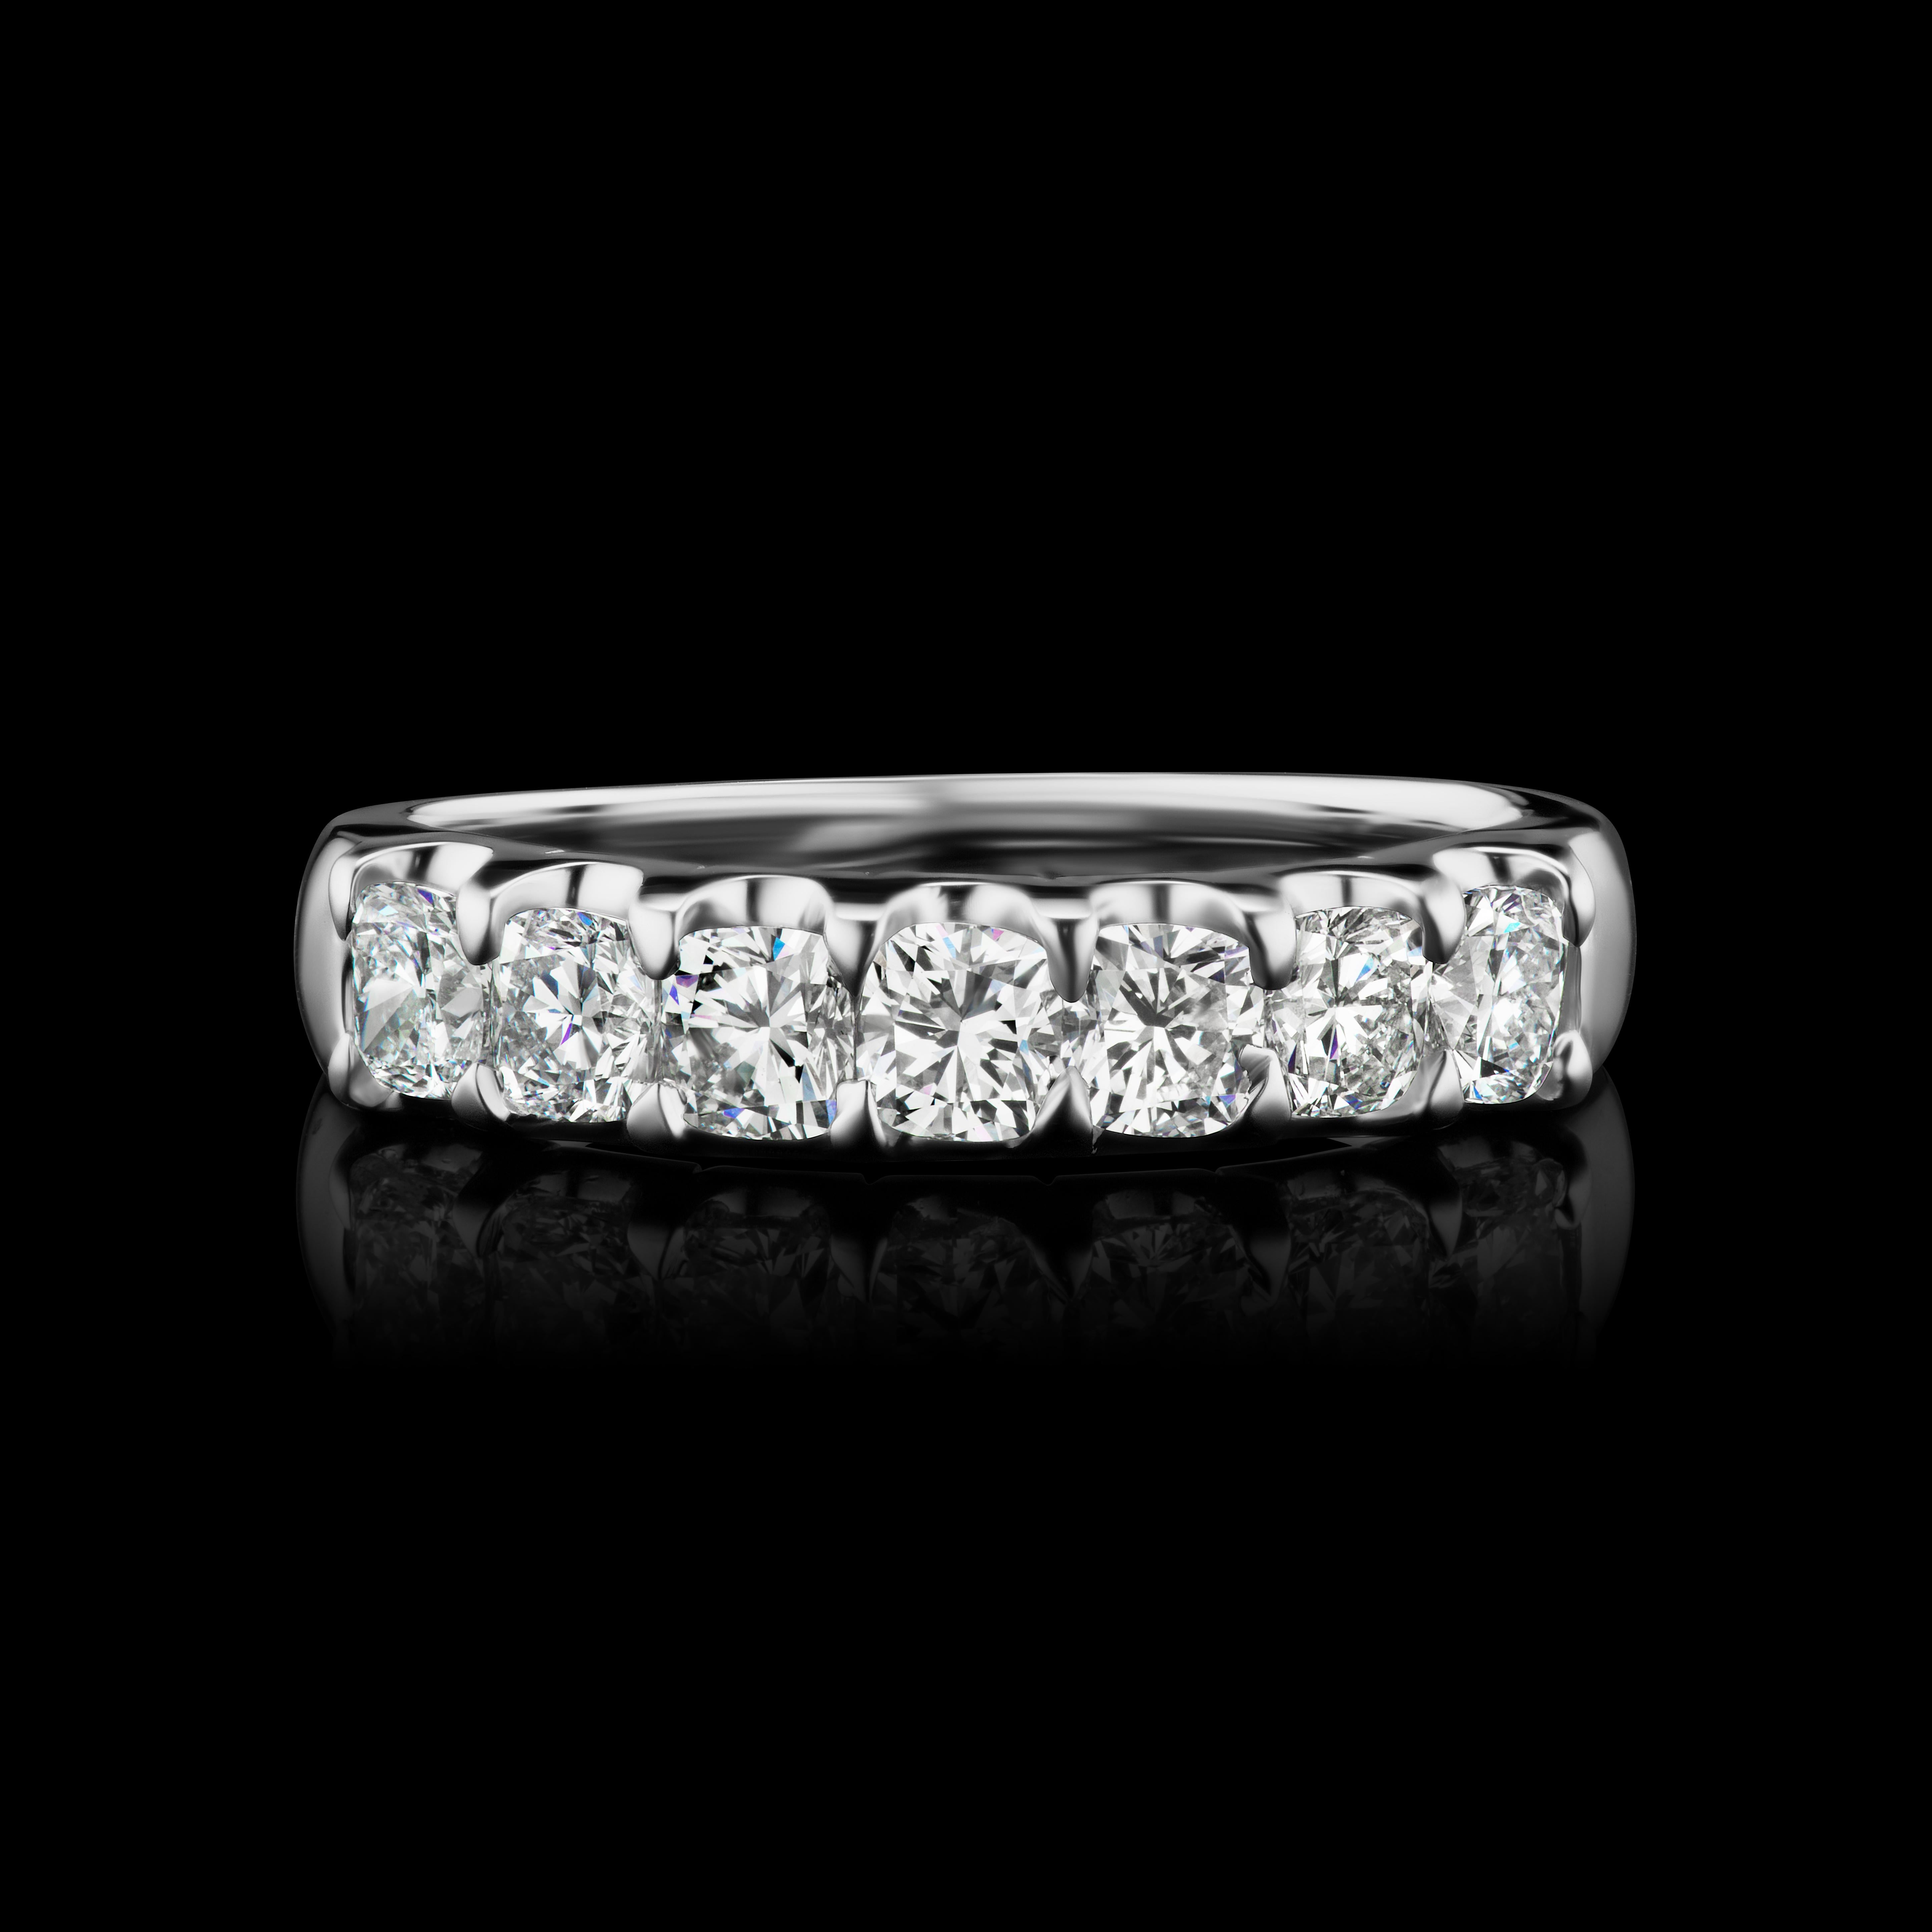 Cushion Diamond Anniversary Ring in 14K White Gold ( 1.40 ct. tw. )

Item Details
• Shine Earth SKU # SCR 694
• Diamond Weight: 1.40 Ct tw.
• Diamond Quality: G Color VS1 Clarity
• Diamond Shape: Cushions
• Diamond Pcs: 7
• Gold Kt: 14K 
• Total